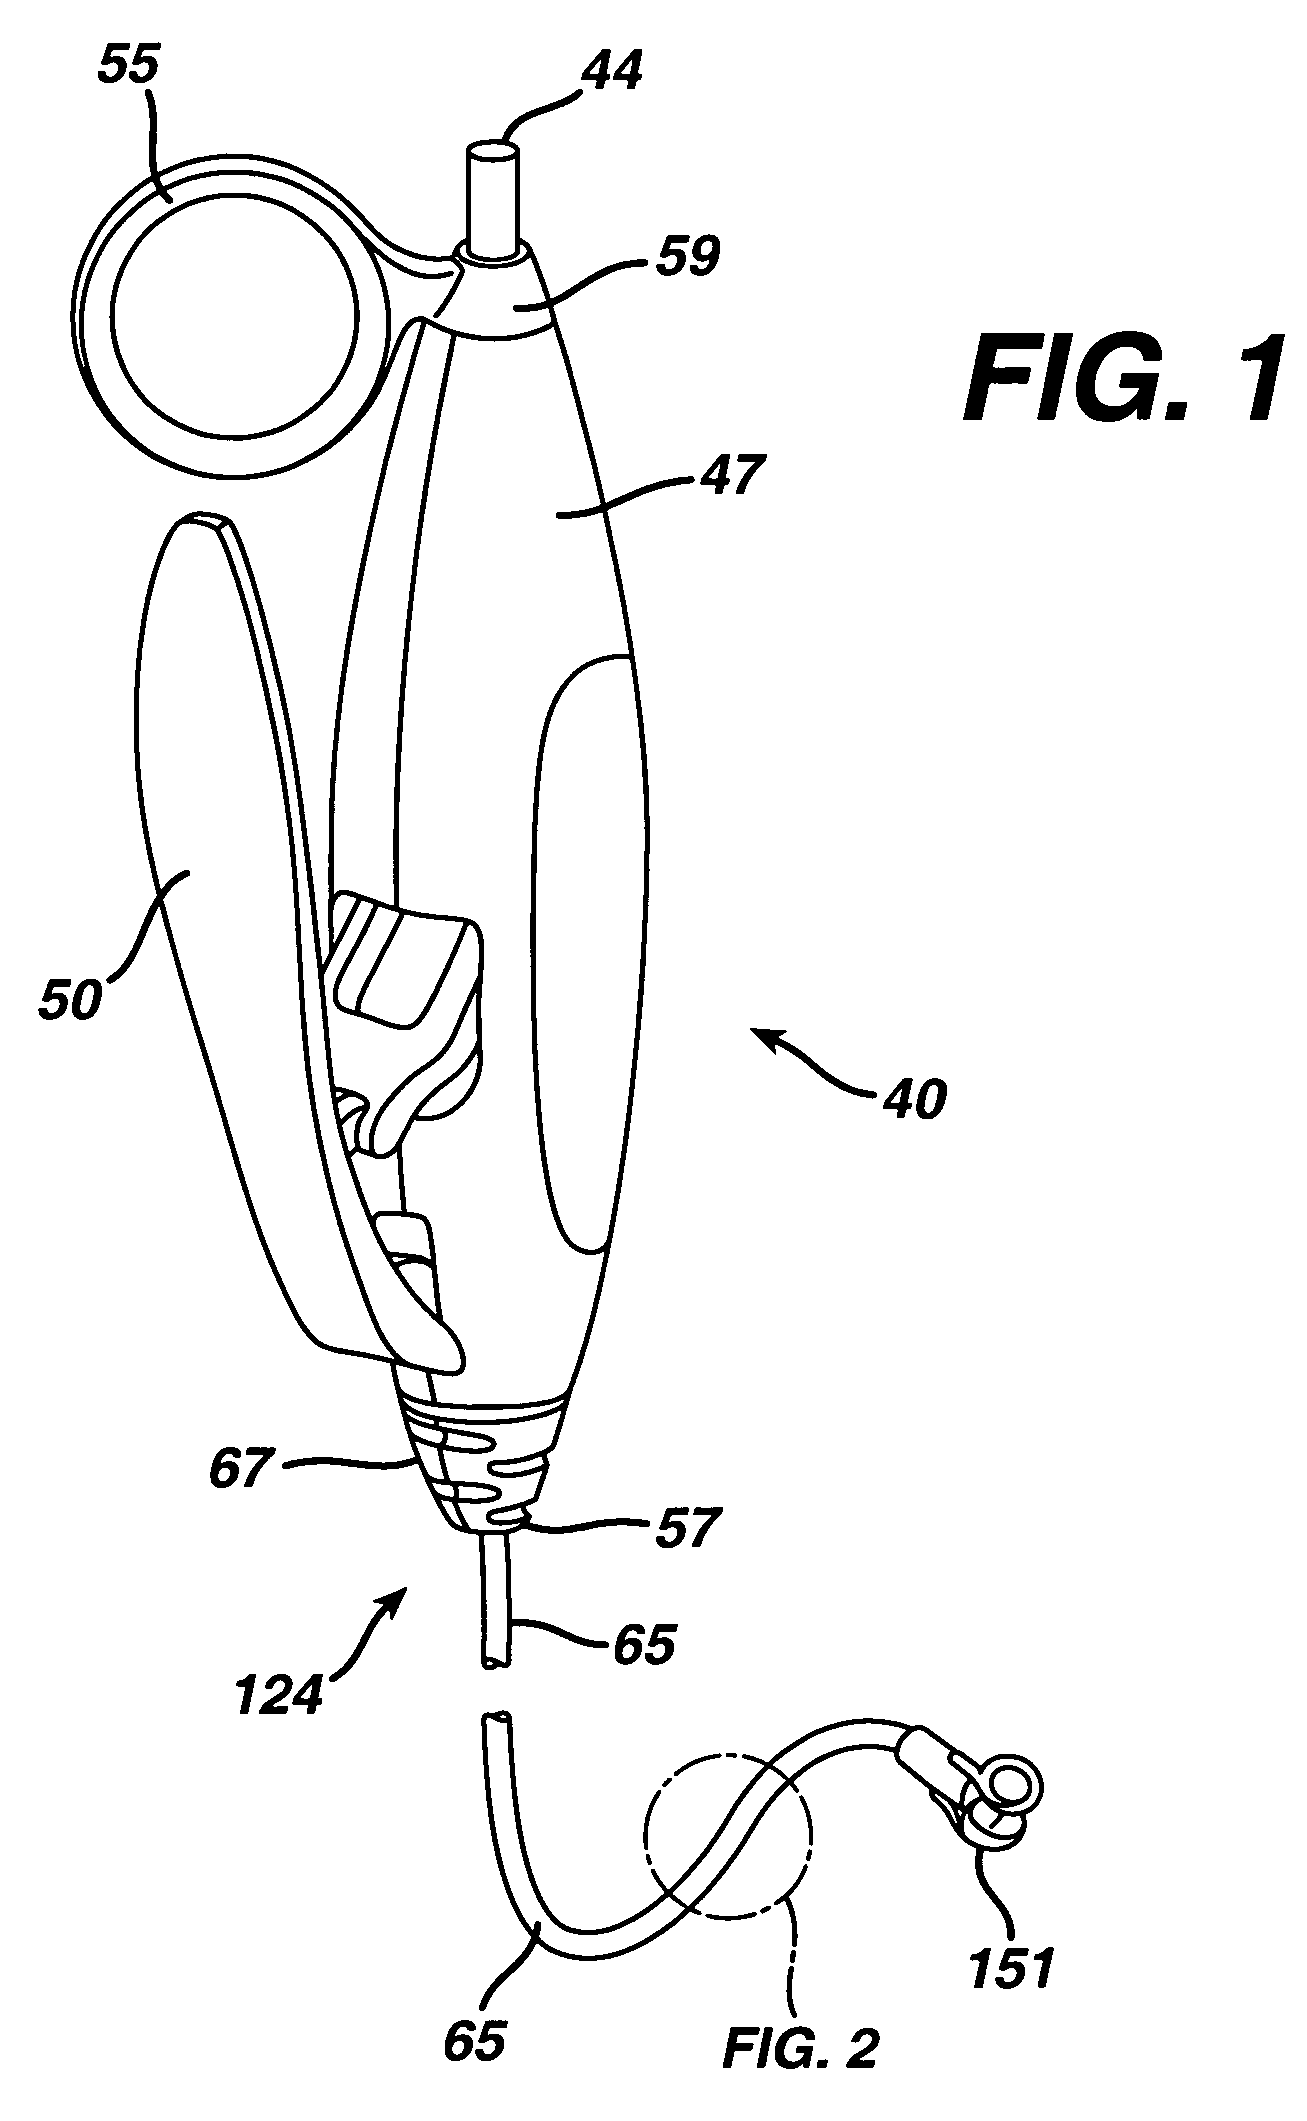 Handle for endoscopic device